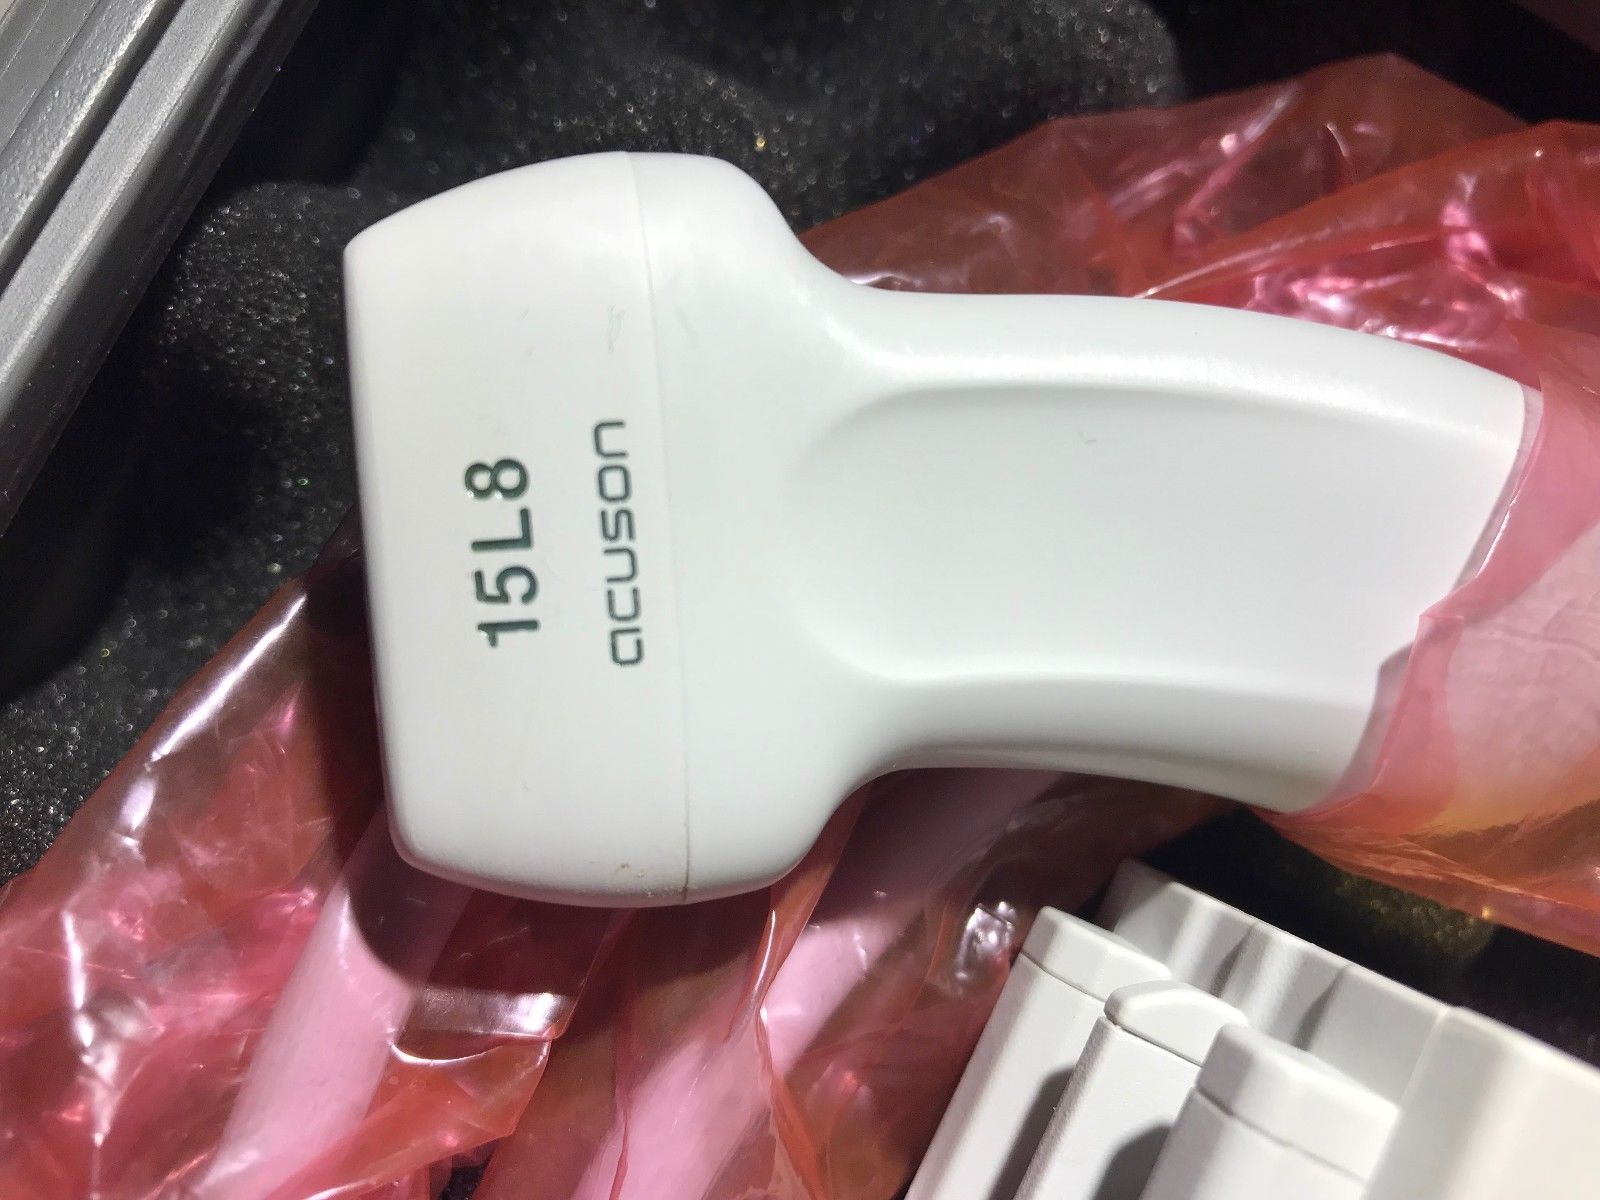 New Siemens Acuson 15L8 Ultrasound Transducer Probe for Sequoia System with Case DIAGNOSTIC ULTRASOUND MACHINES FOR SALE